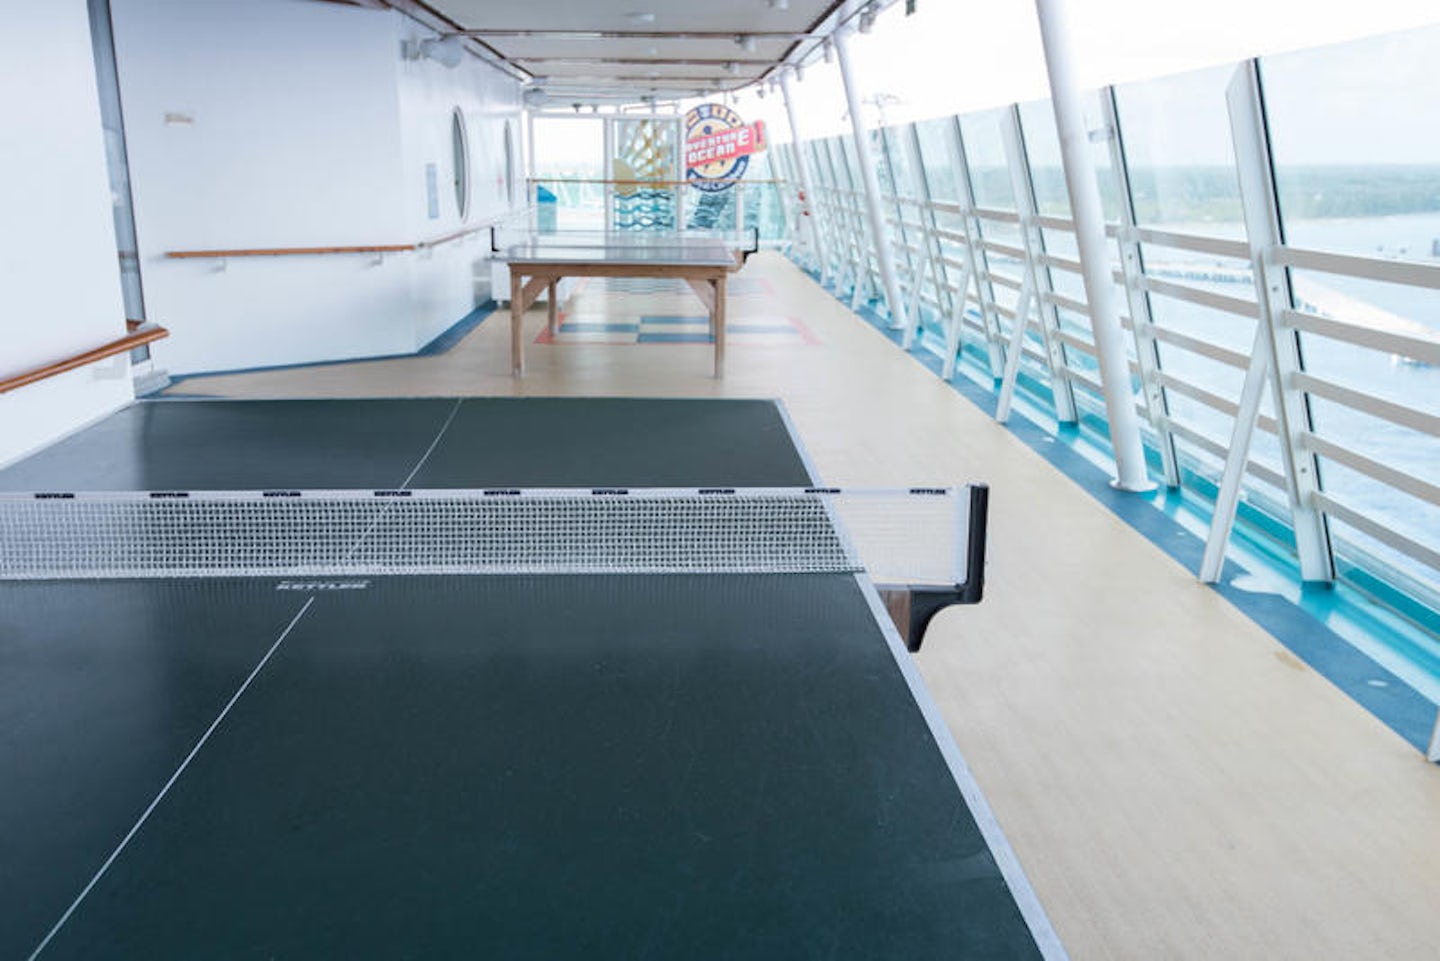 Deck Games on Freedom of the Seas